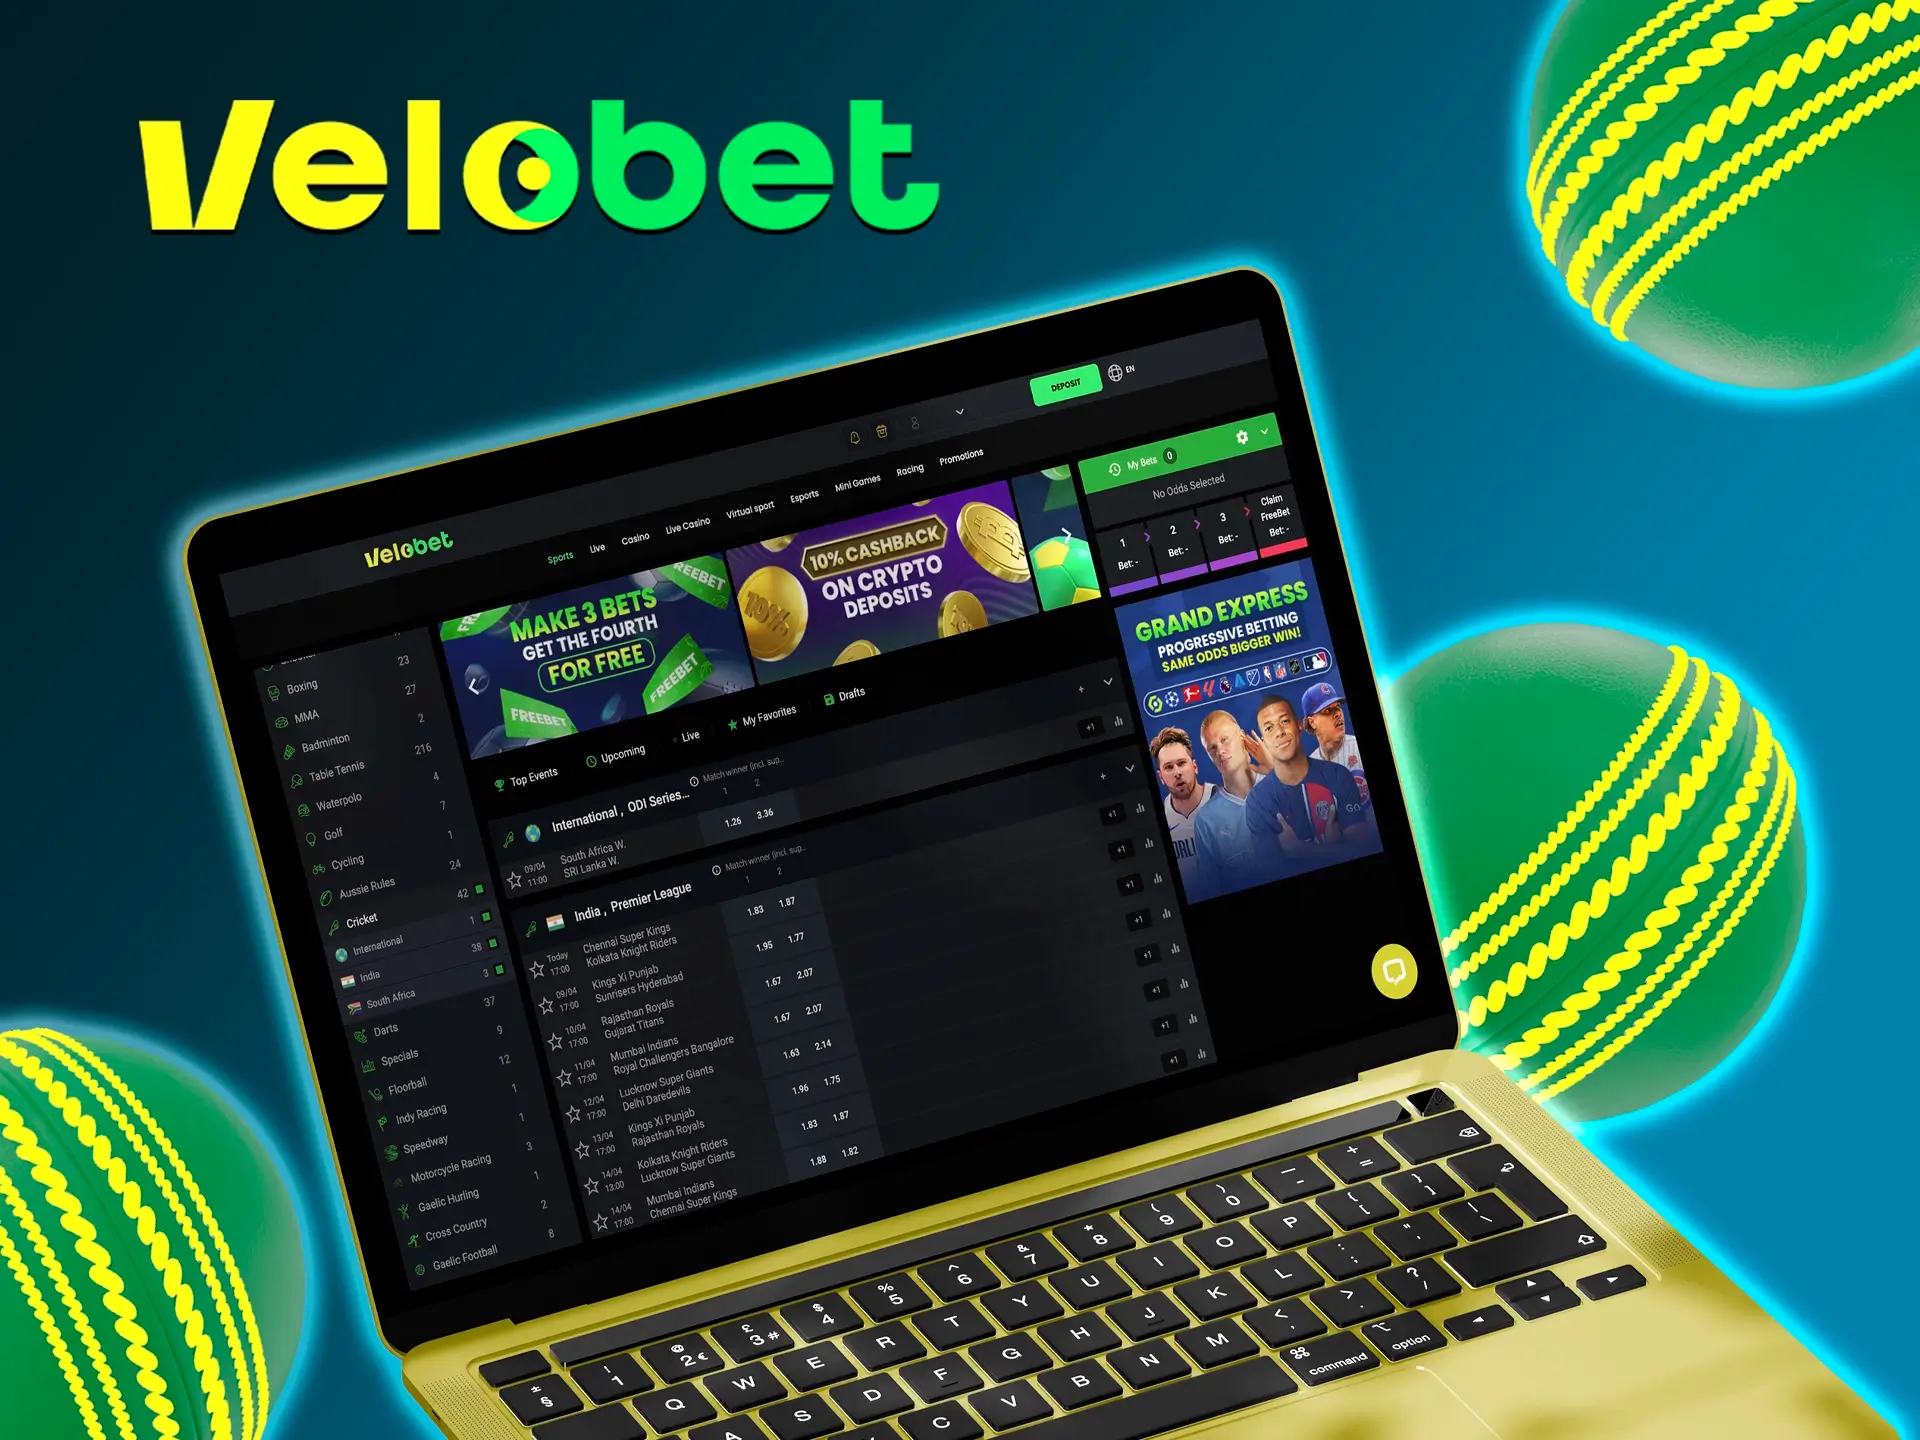 Take the opportunity to make an accurate prediction on the matches of the most popular cricket tournament at Velobet bookmaker.